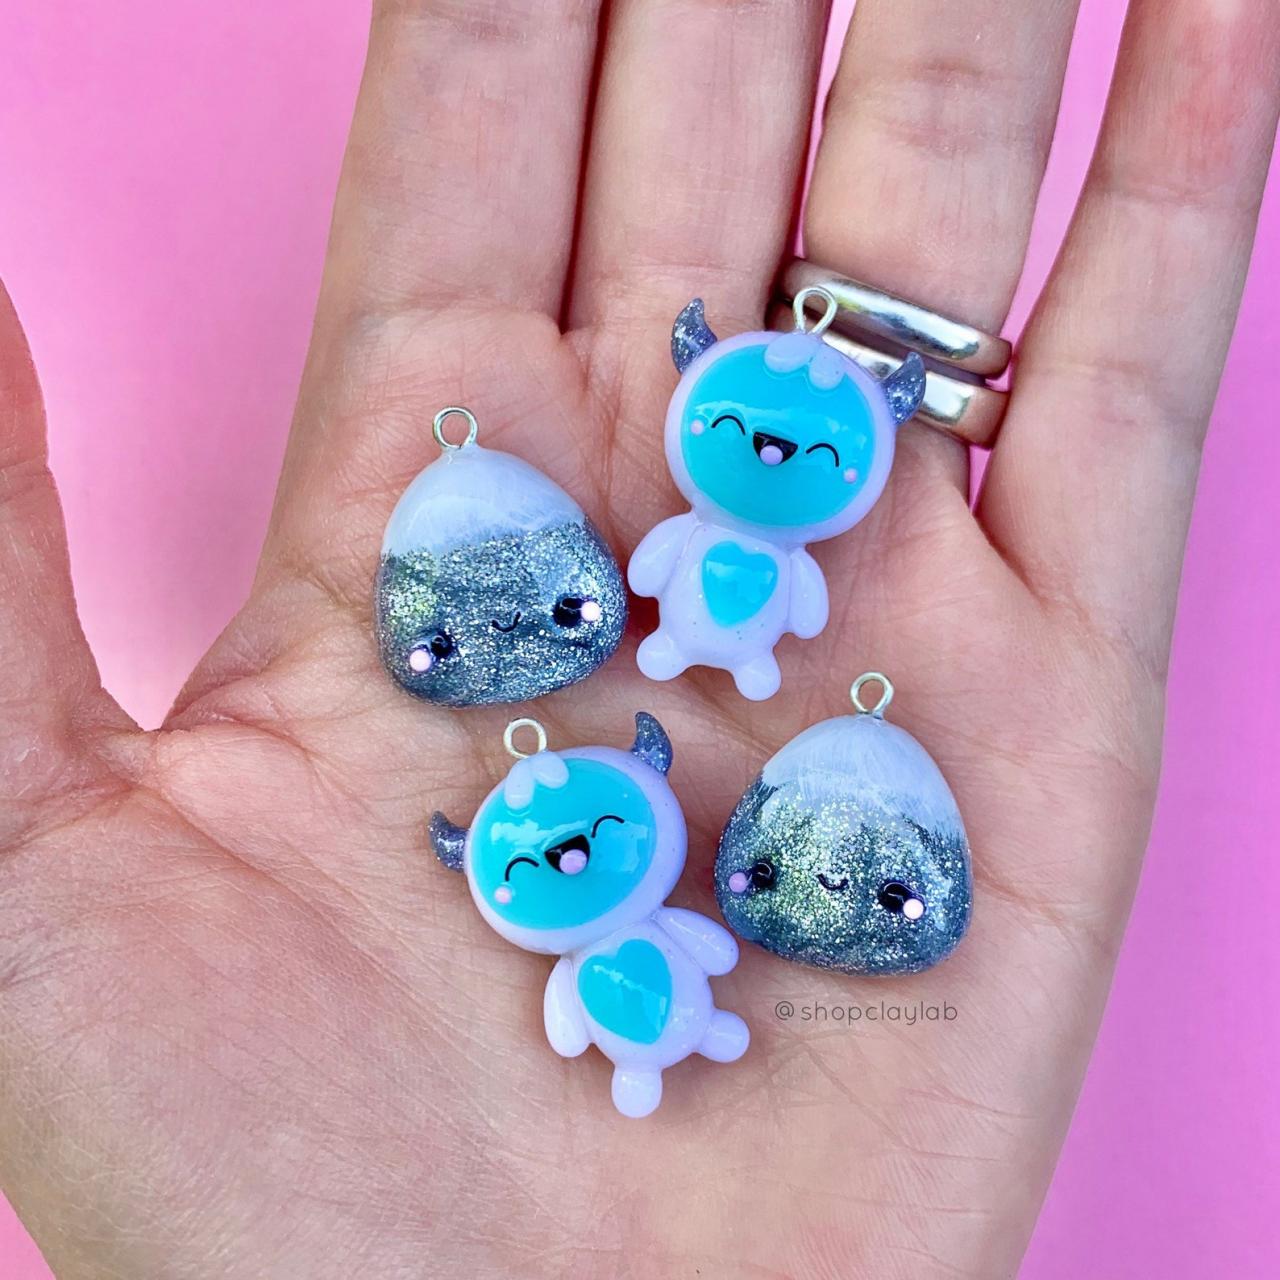 Kawaii Yeti Polymer Clay Charm| Cute Glitter Snowy Mountain Charm| Friendship Necklace Charms| Funny Gifts| Progress Keepers| Stitch Markers